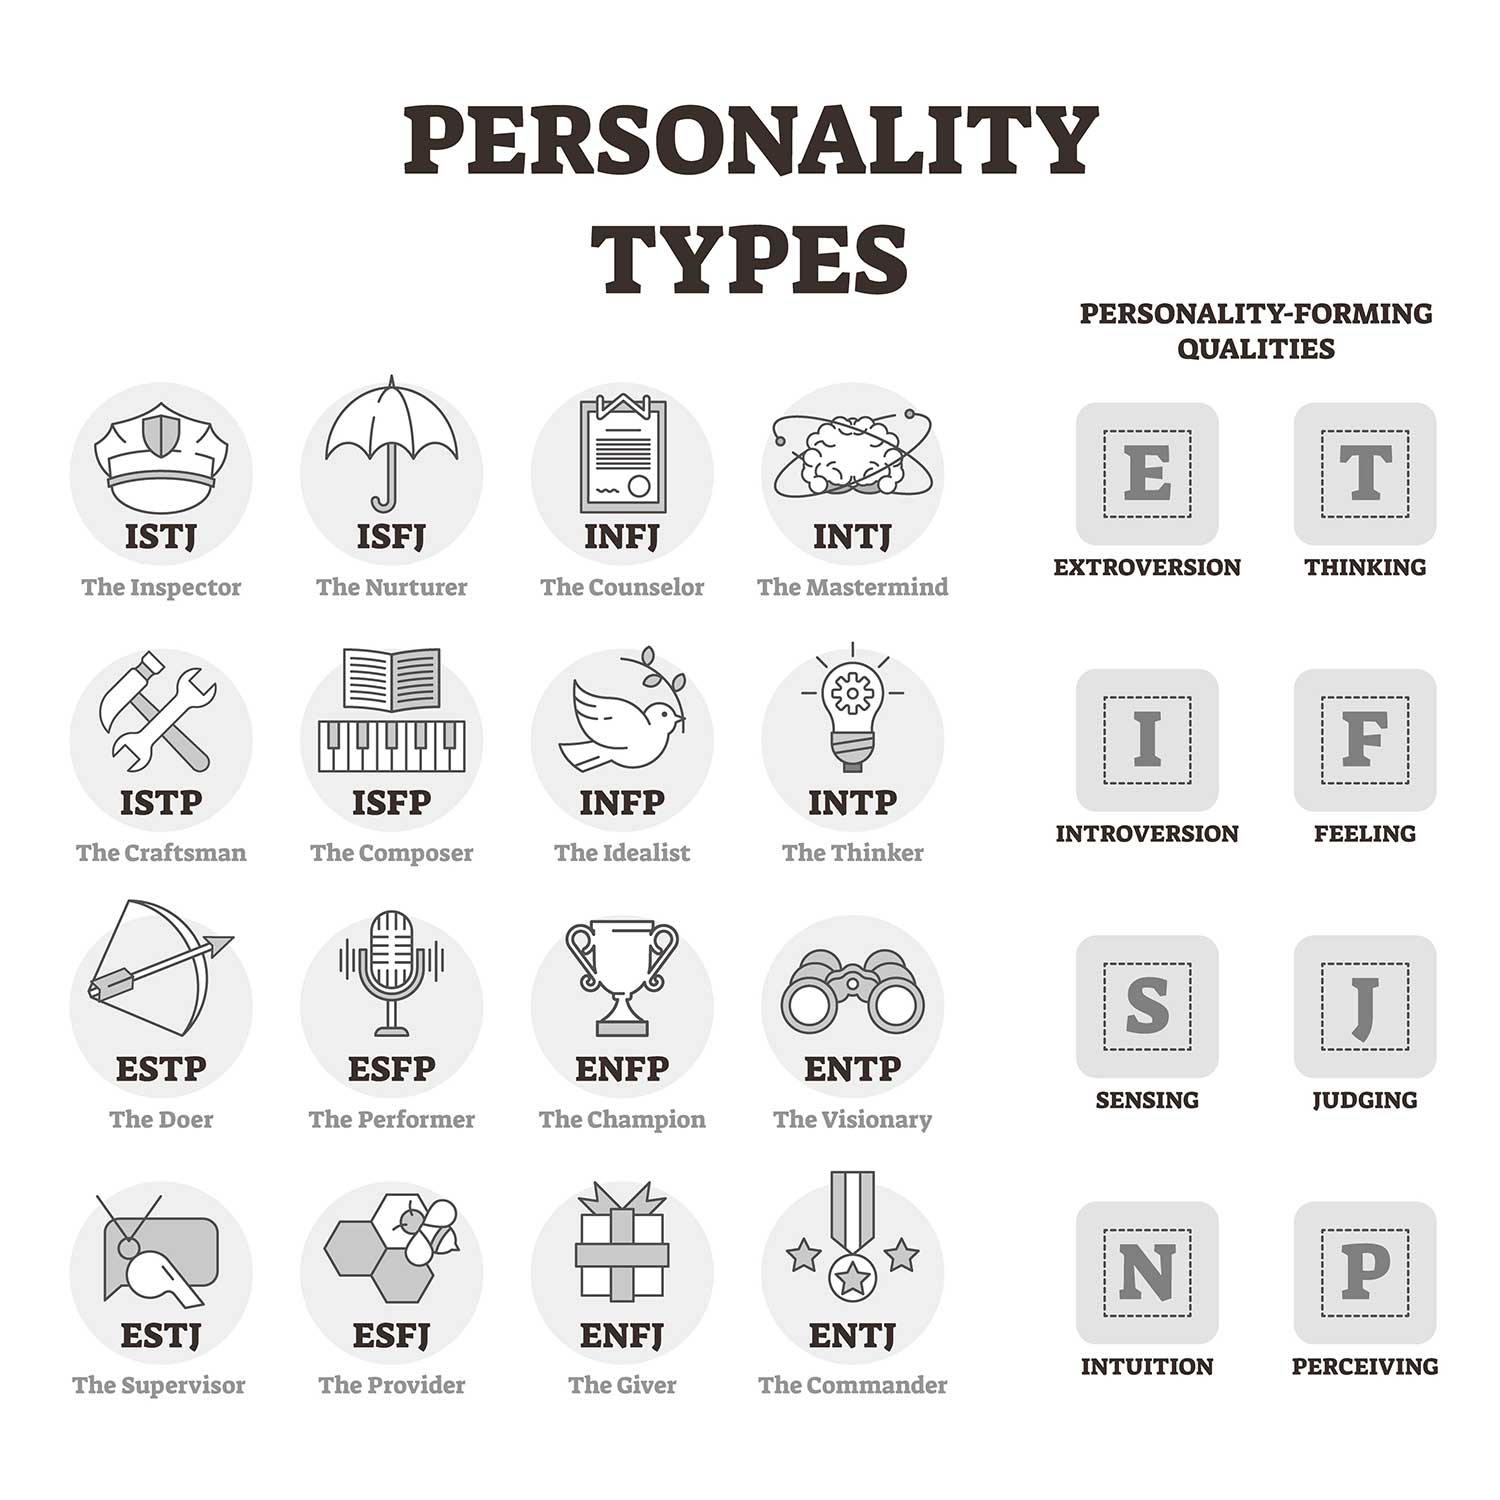 Myers-Briggs 16 Personality Types